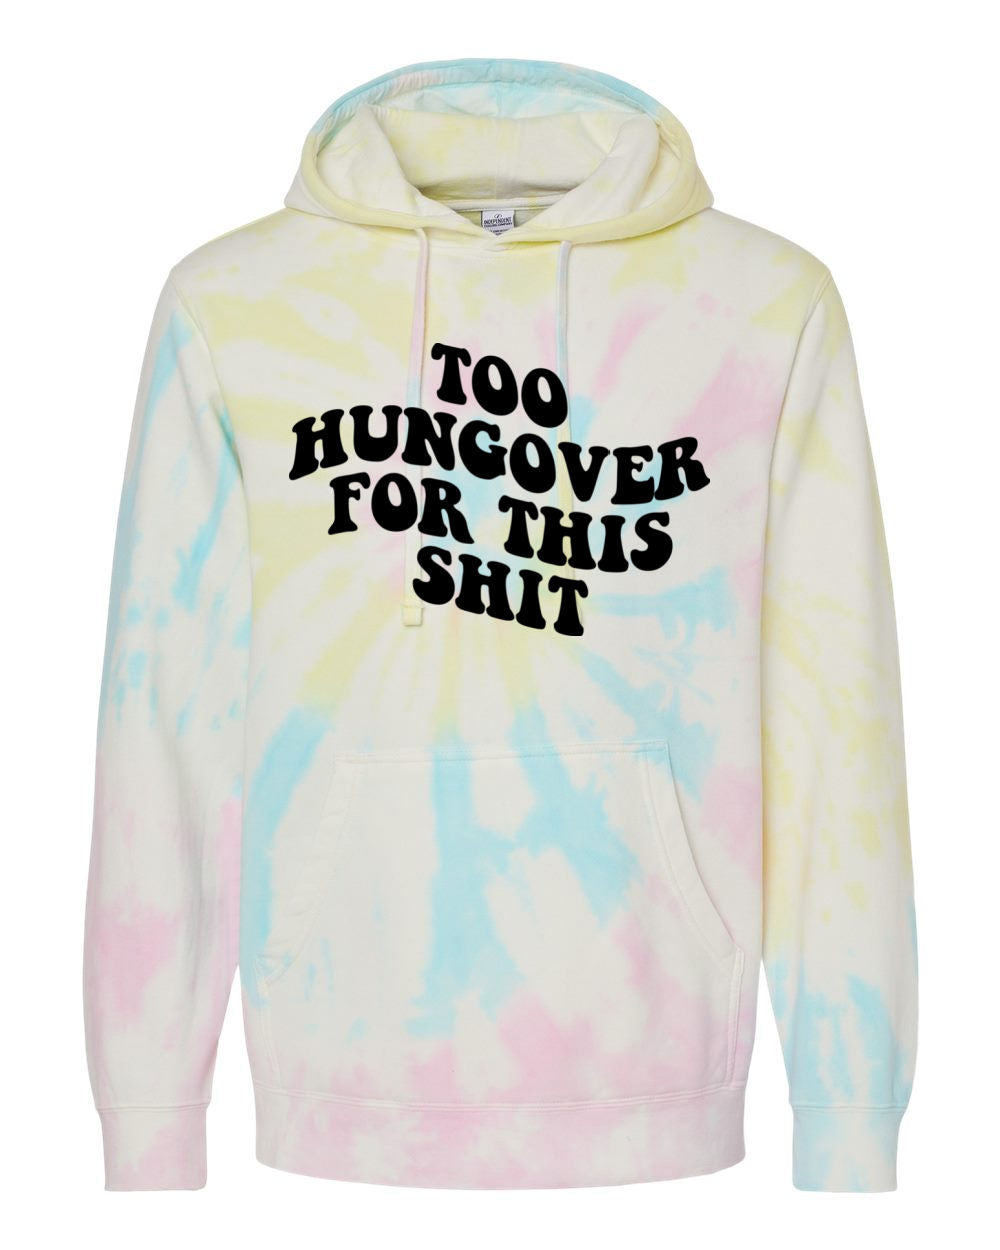 Too Hungover For This Shit Tie Dye Hoodie